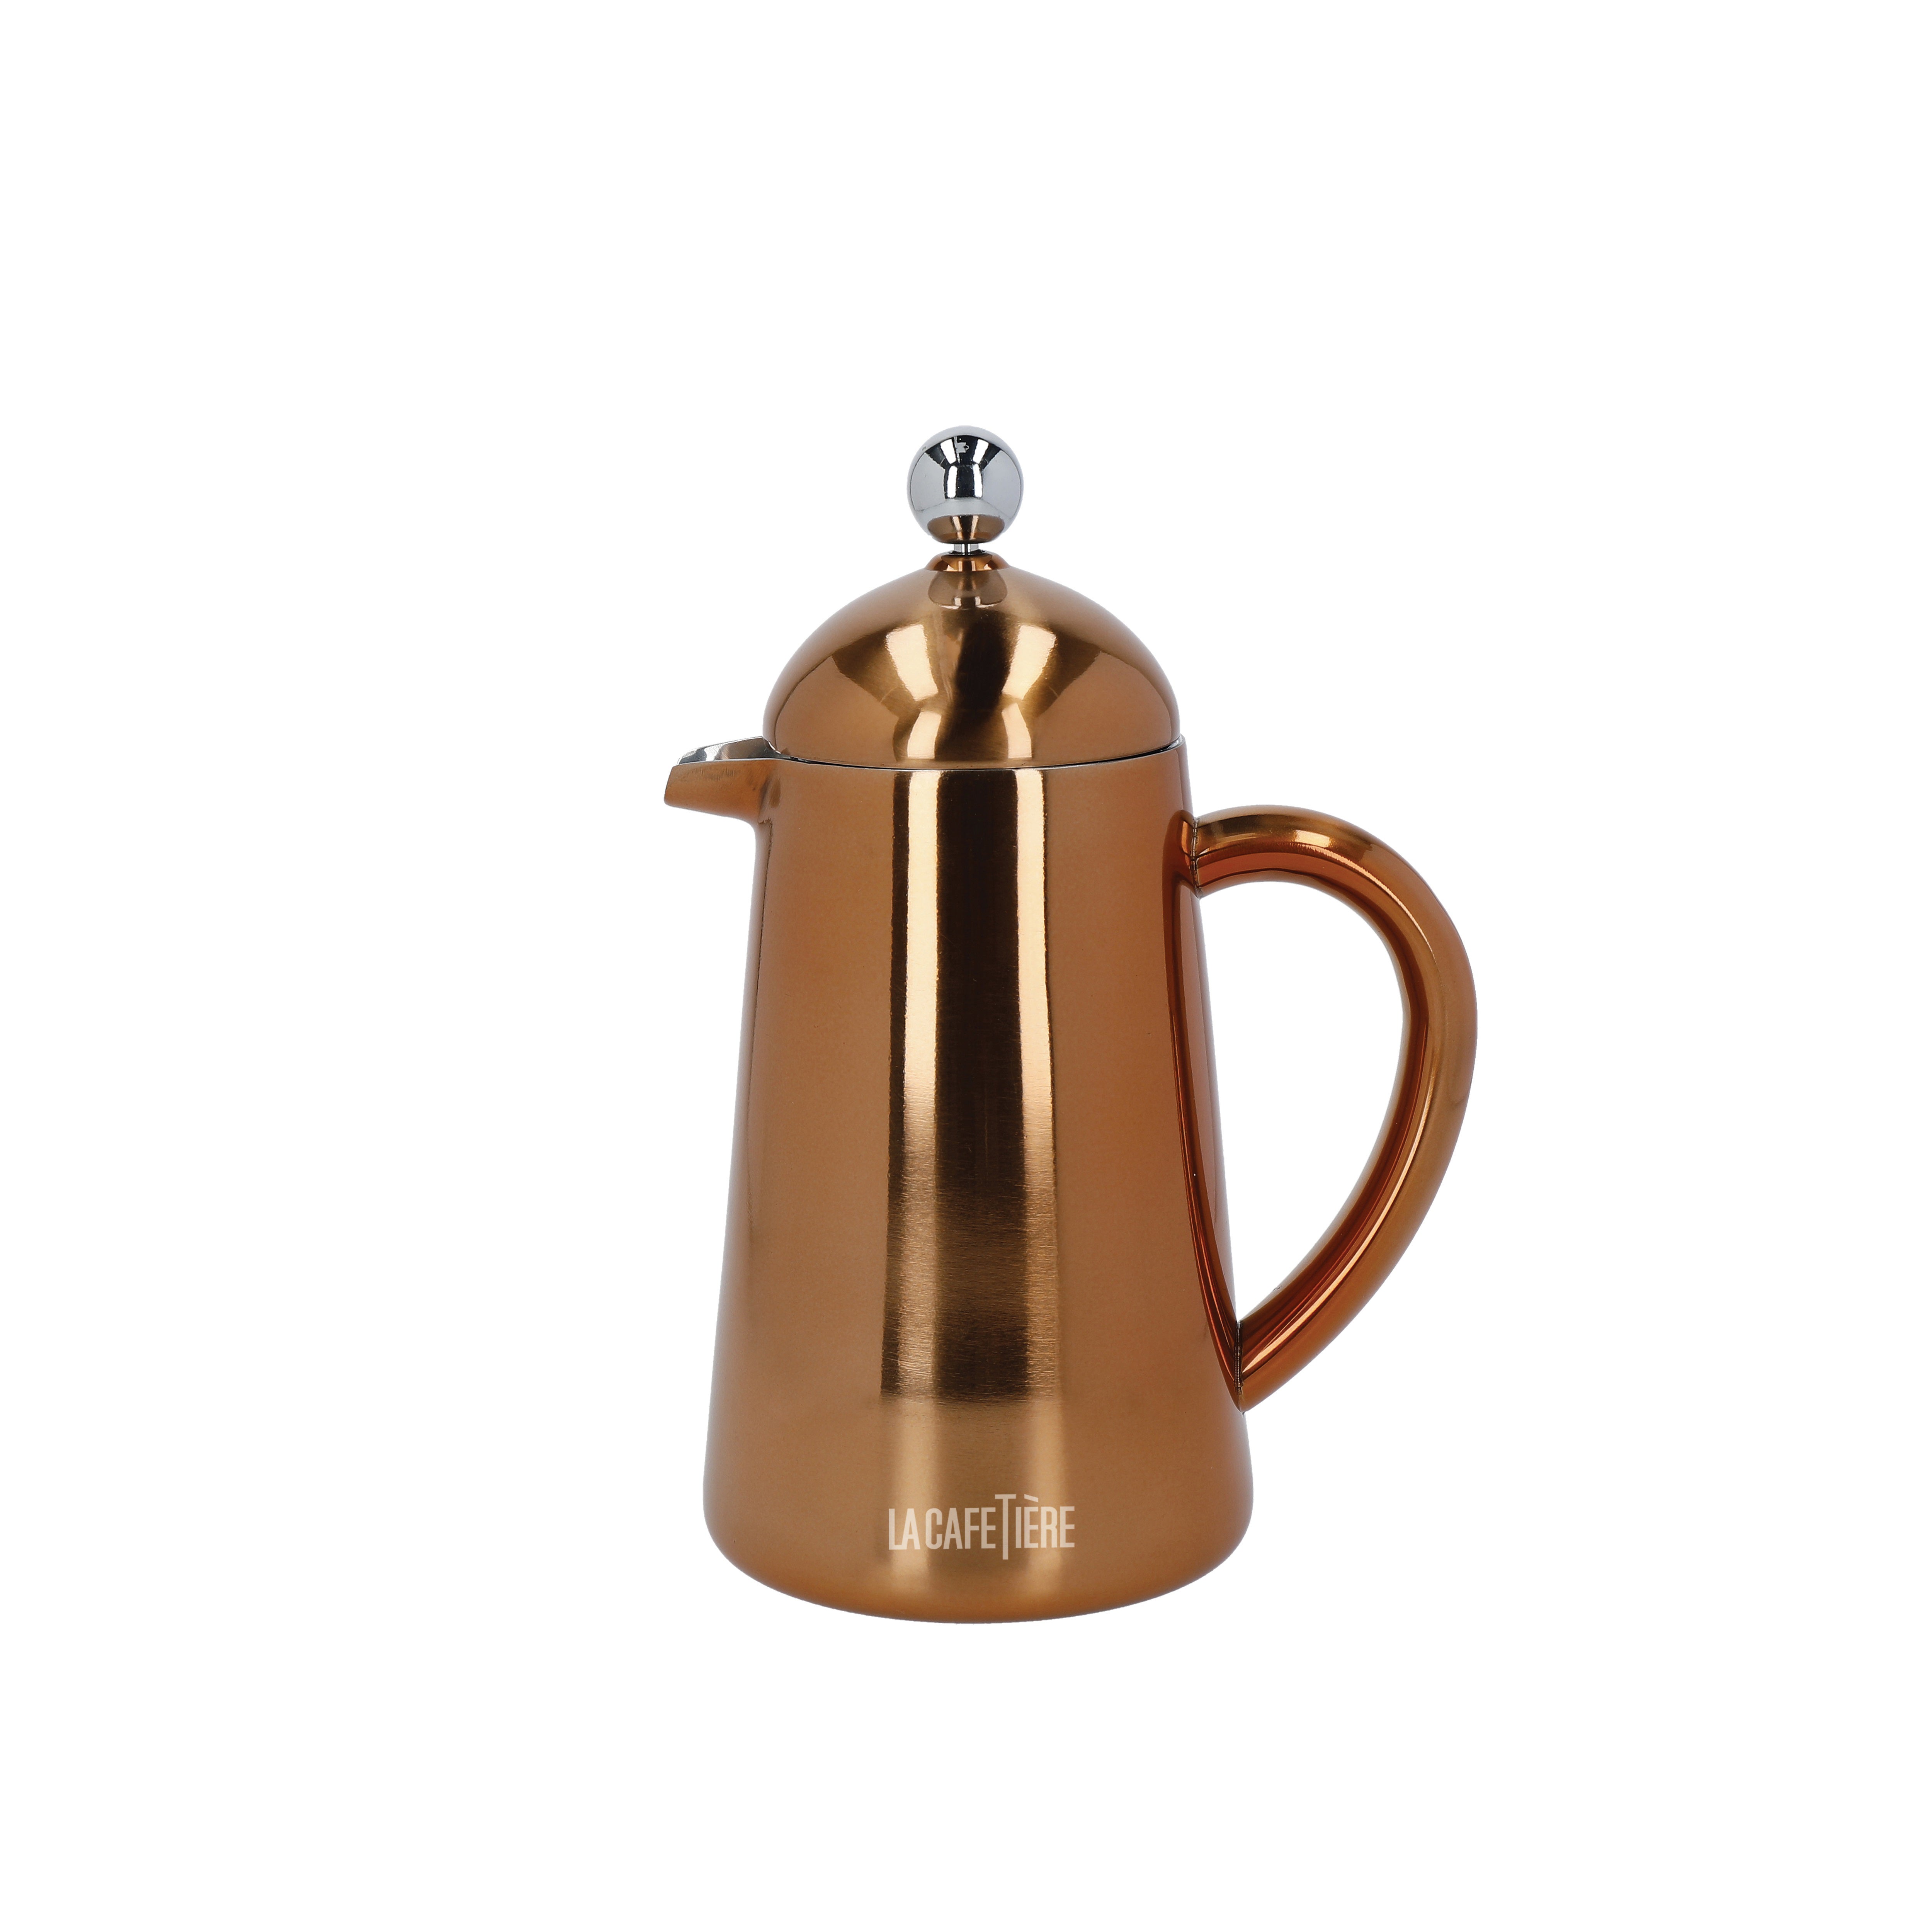 La Cafetier 3 Cup Double Walled Cafetiere